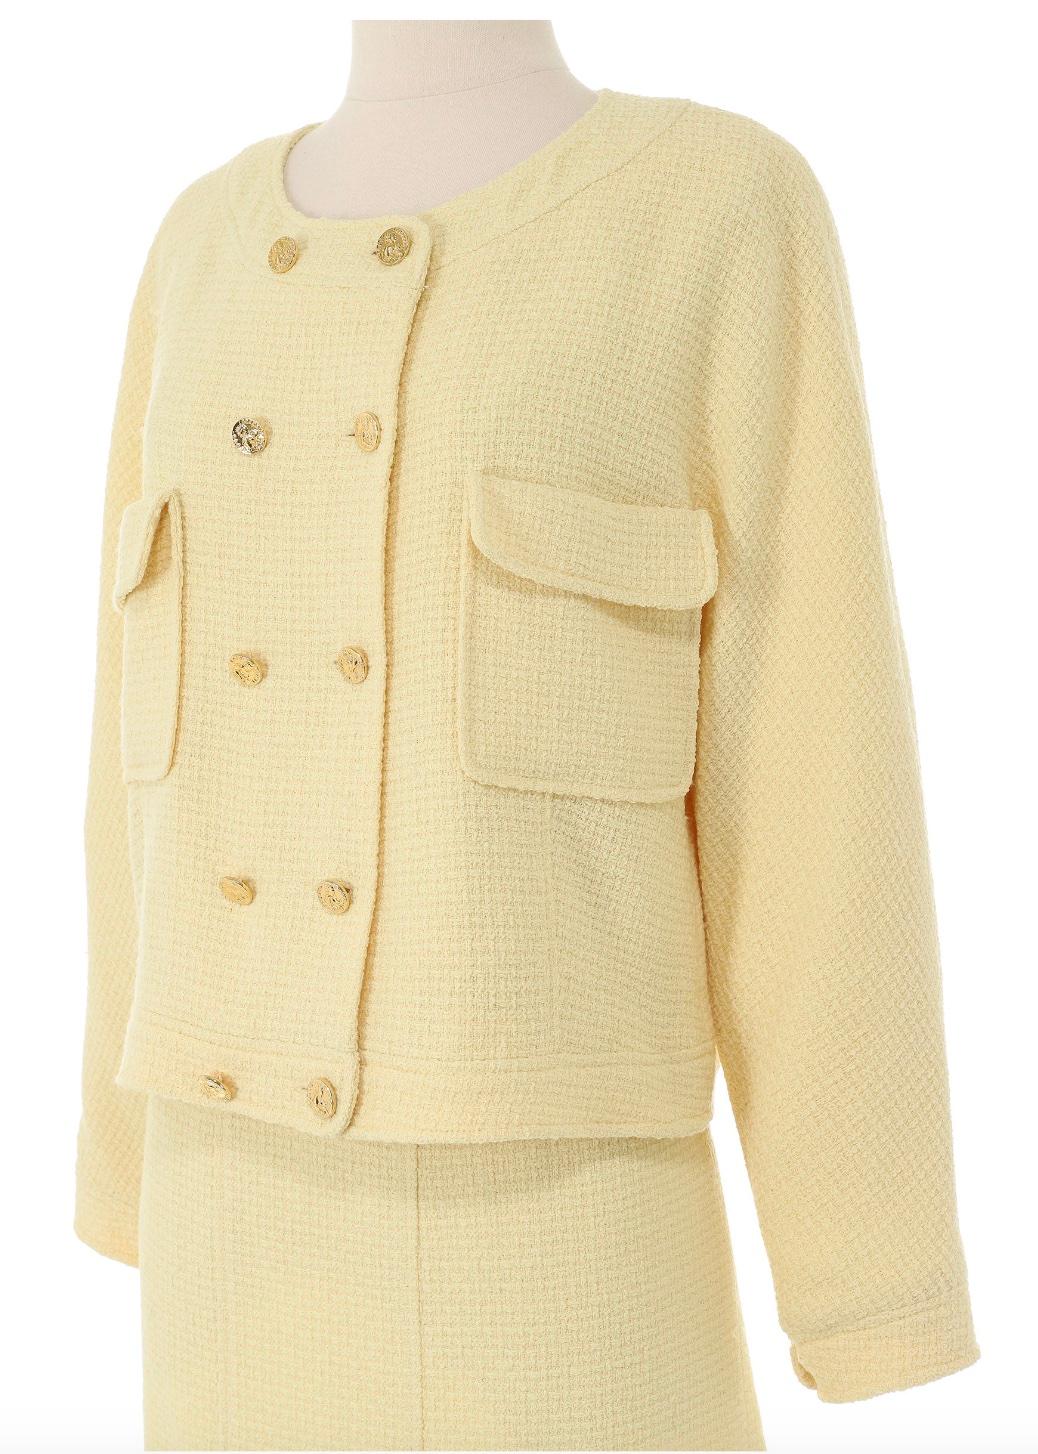 Chanel Yellow Tweed Skirt Suit with Gold Buttons In Excellent Condition In New York, NY